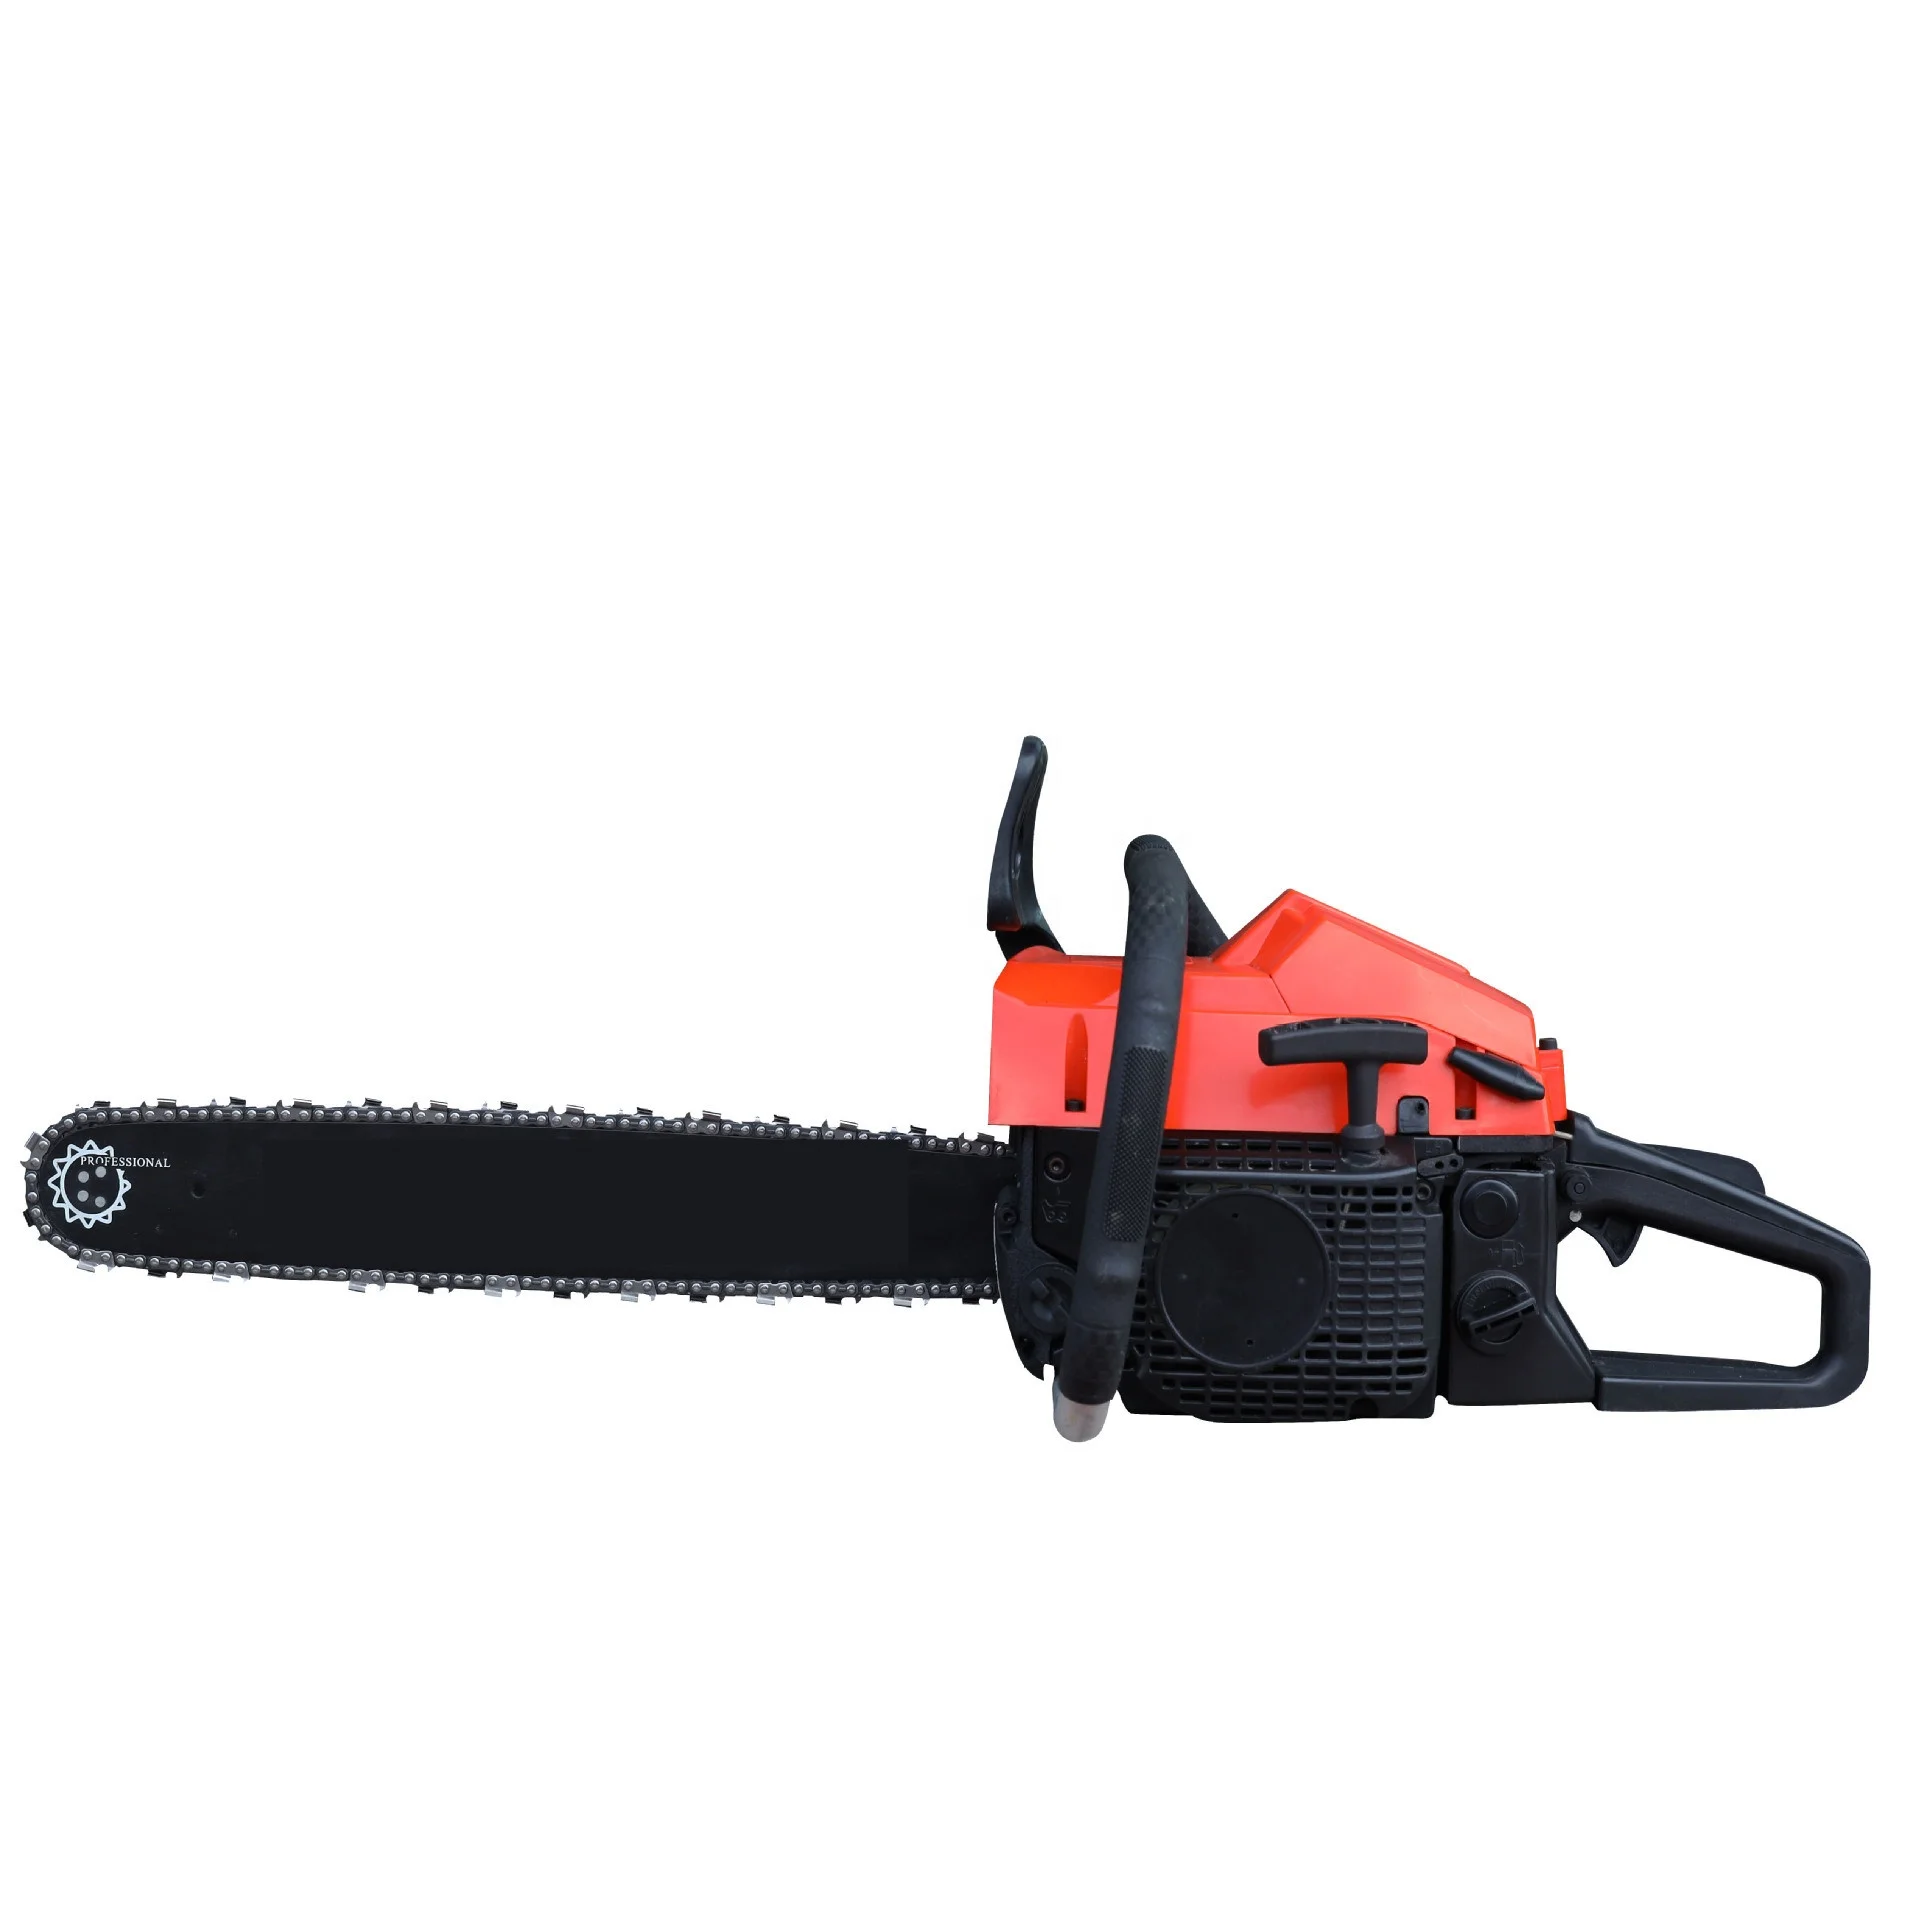 2021 Wholesale price Cutting Wood Agriculture Machinery 52cc Gas Chainsaw/Household gasoline logging saw